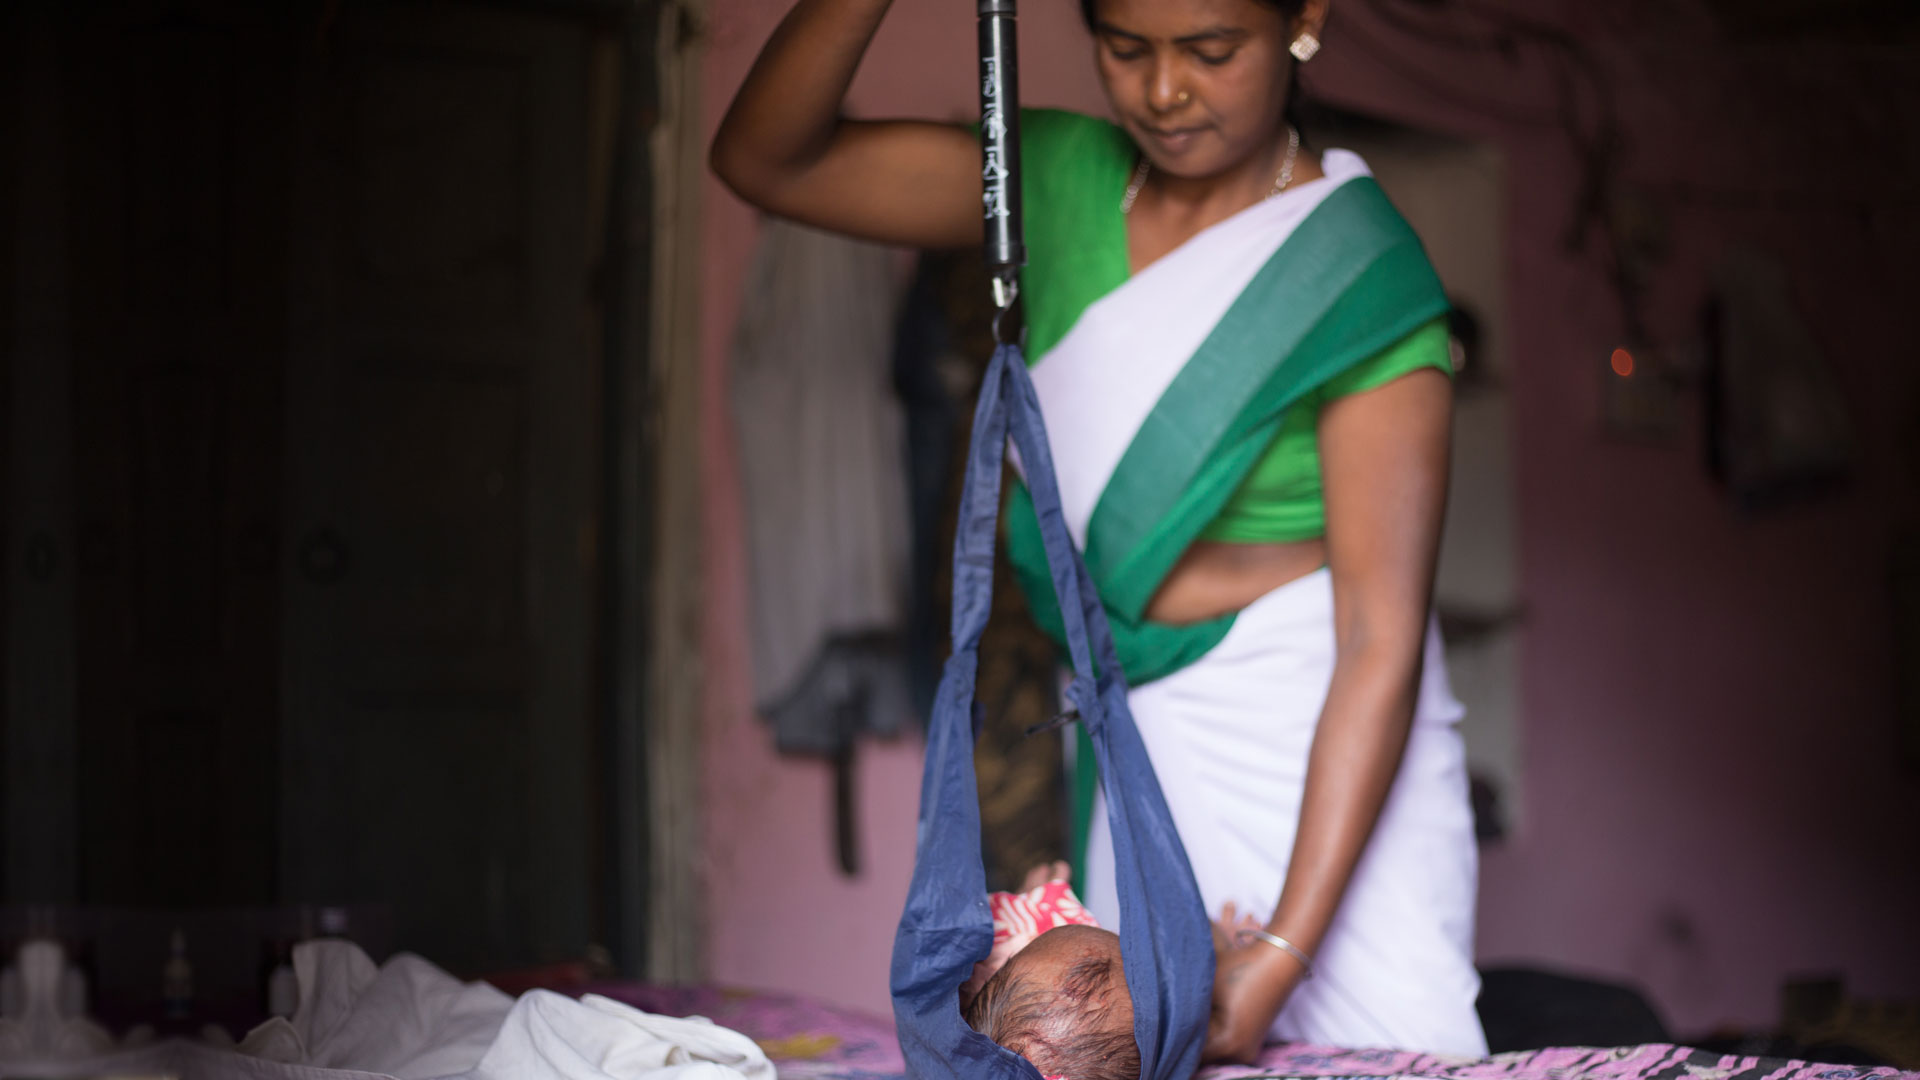 Tata Steel Foundation’s MANSI is equipping community health workers and improve maternal health, a key national health issue